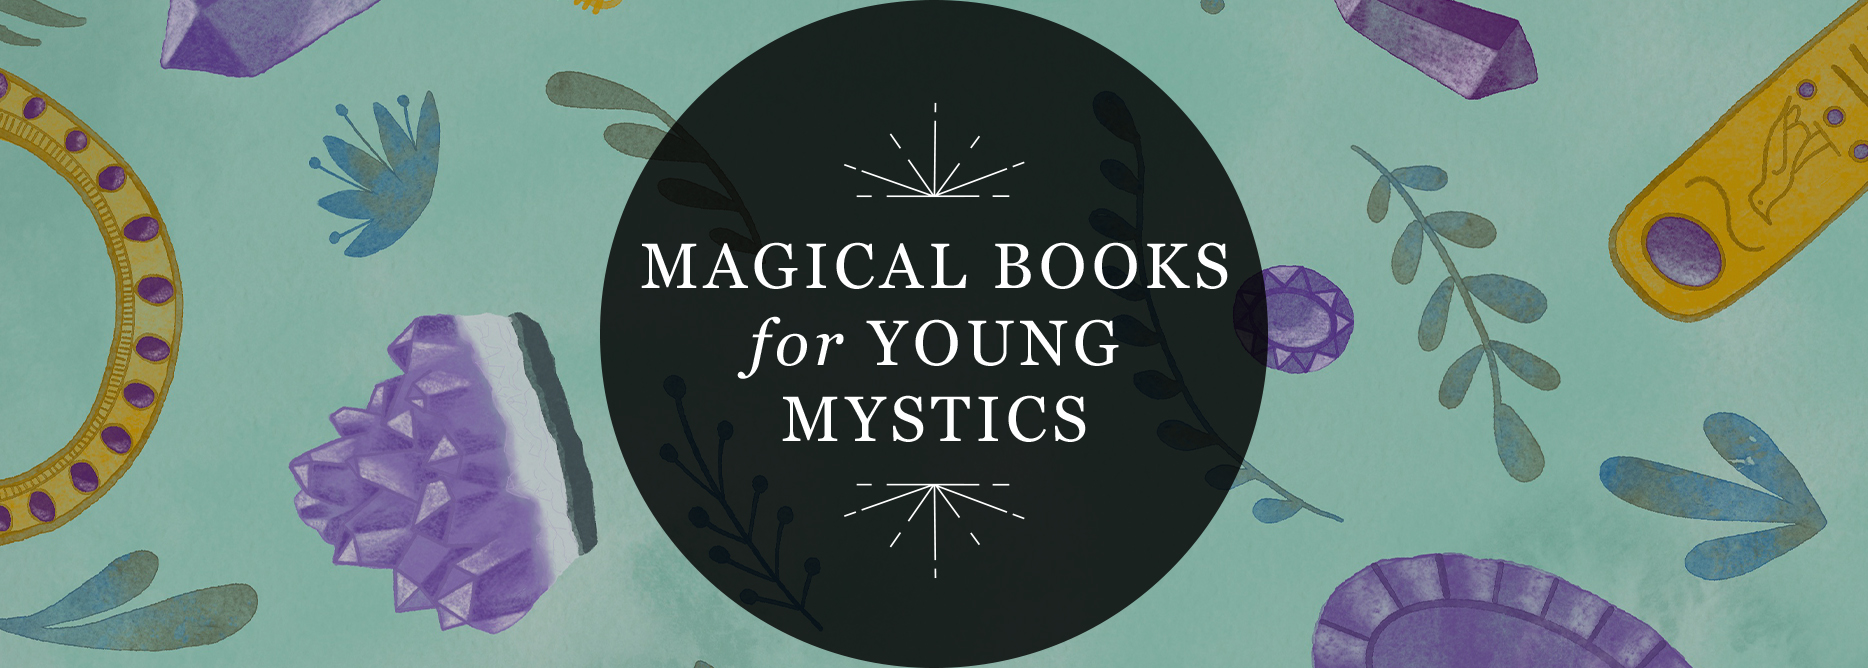 RP Mystic - Illustrated header image that reads 'Magical Books for Young Mystics'